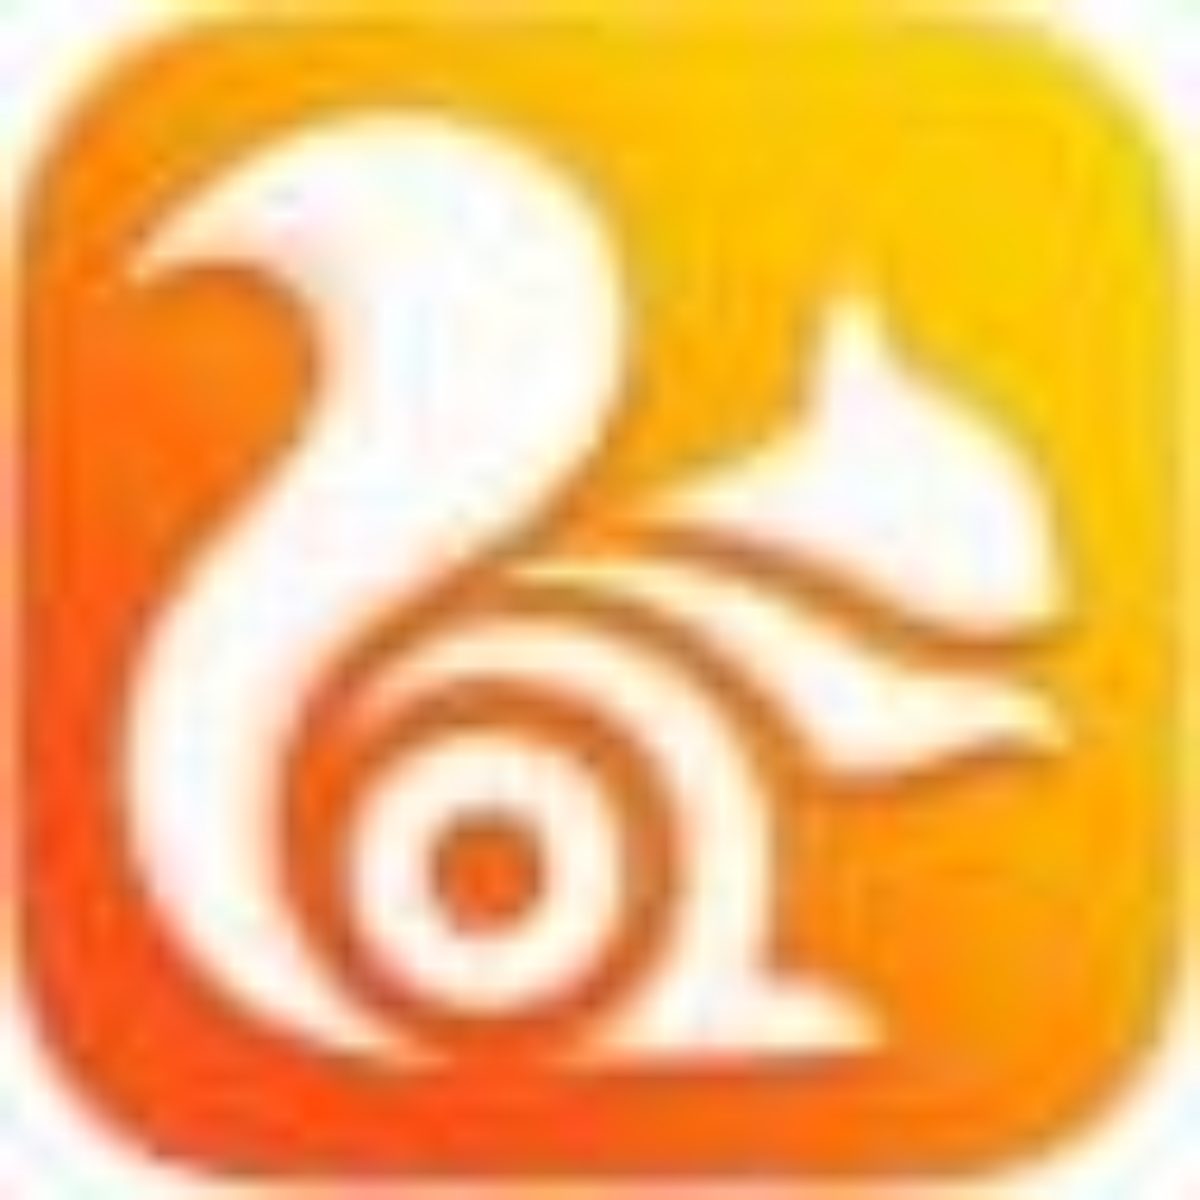 Uc Browser 7 0 185 1002 For Pc Windows Download